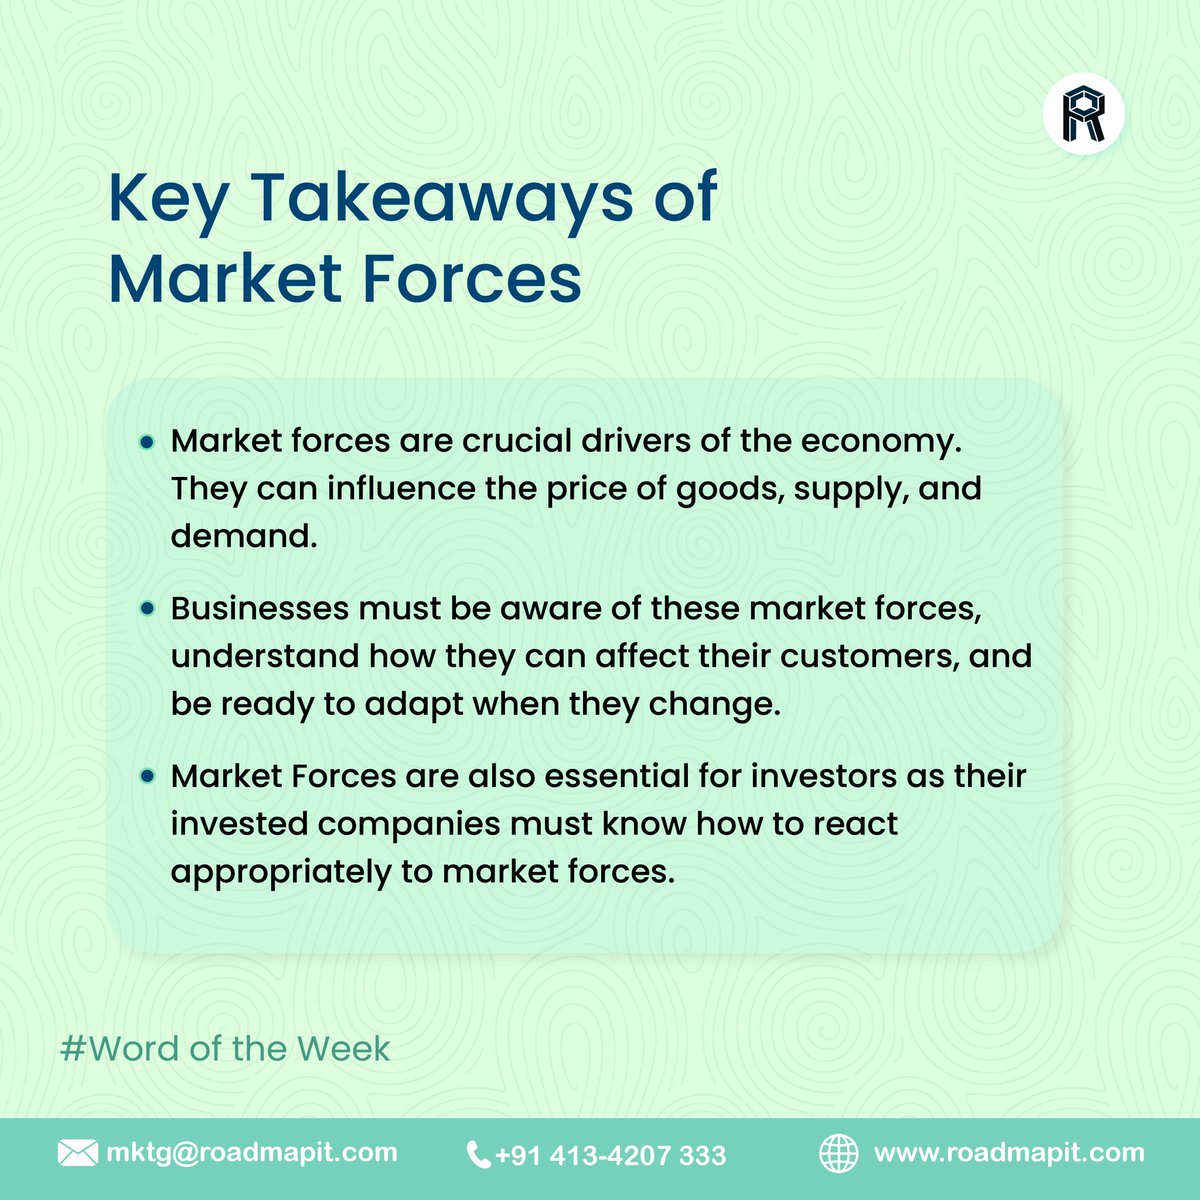 It's imperative for businesses to acknowledge this fact and take necessary measures to adapt to the changing market forces.

#MarketForces #SupplyChain #Demand #Supply #DemandSupplyEquilibrium #EquilibriumPrice #IndustryAnalysis #erp #erpsoftware #roadmaperp #softwareservices